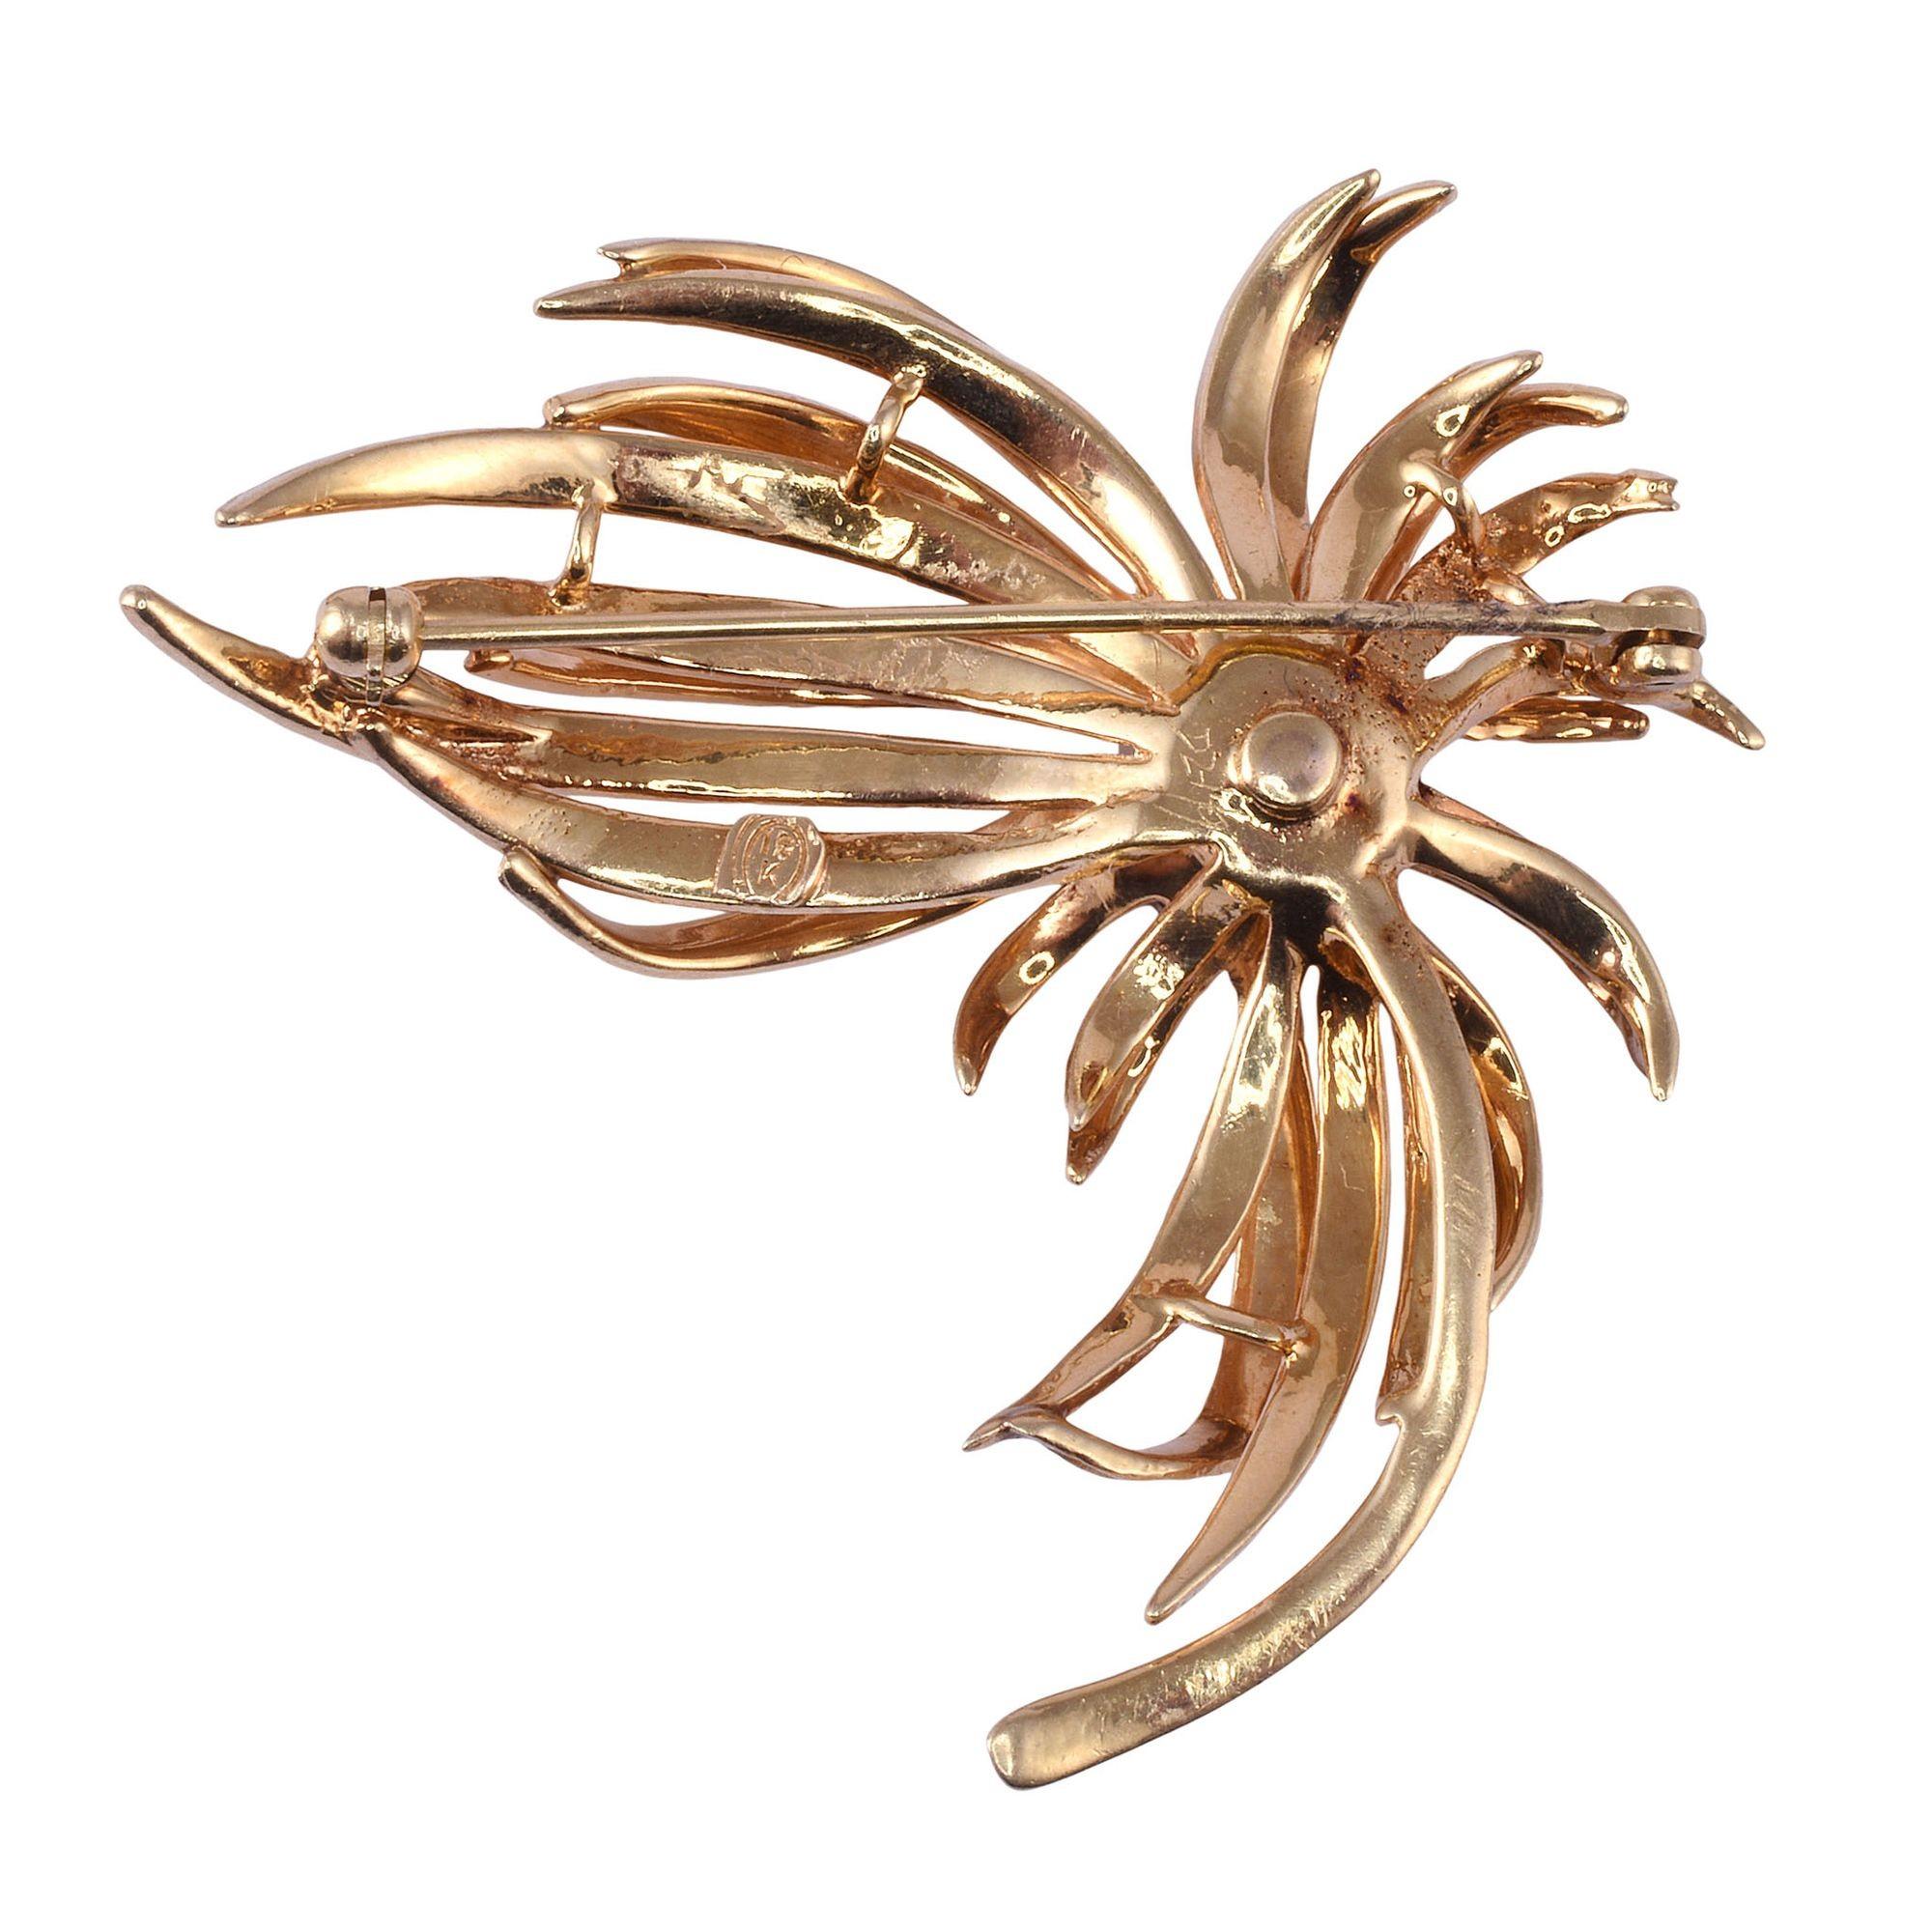 Vintage diamond 18K spray brooch, circa 1970. This vintage brooch is crafted in 18 karat yellow gold. The spray style brooch features a cluster of diamonds with a .18 carat center diamond and .48 carat total weight of surrounding diamonds, for a .66